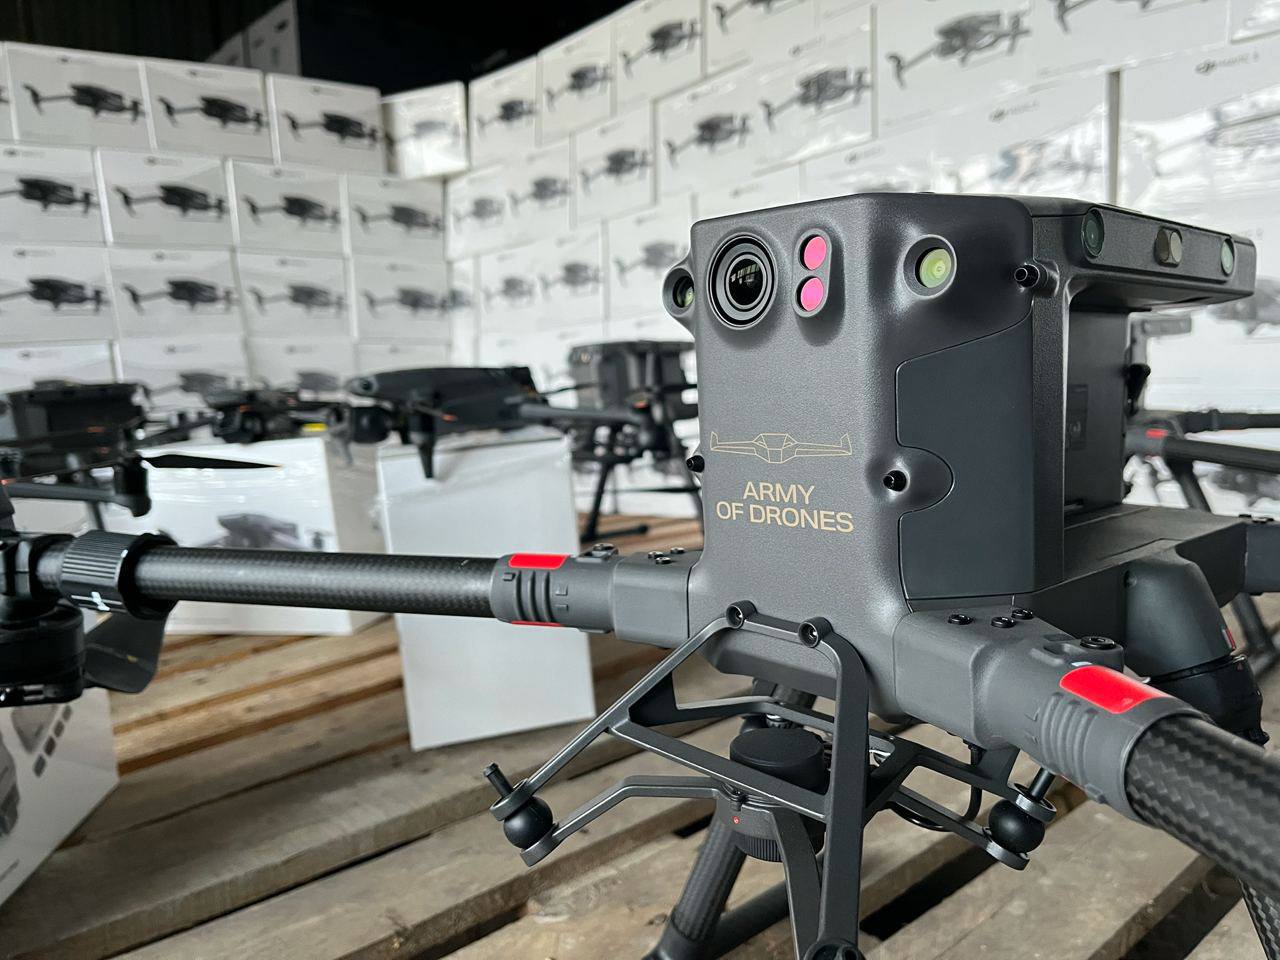 "The Army of Drones" handed over 146 DJI Mavic 3 quadcopters and 33 DJI Matrice RTK 300 drones to the Ukrainian Armed Forces